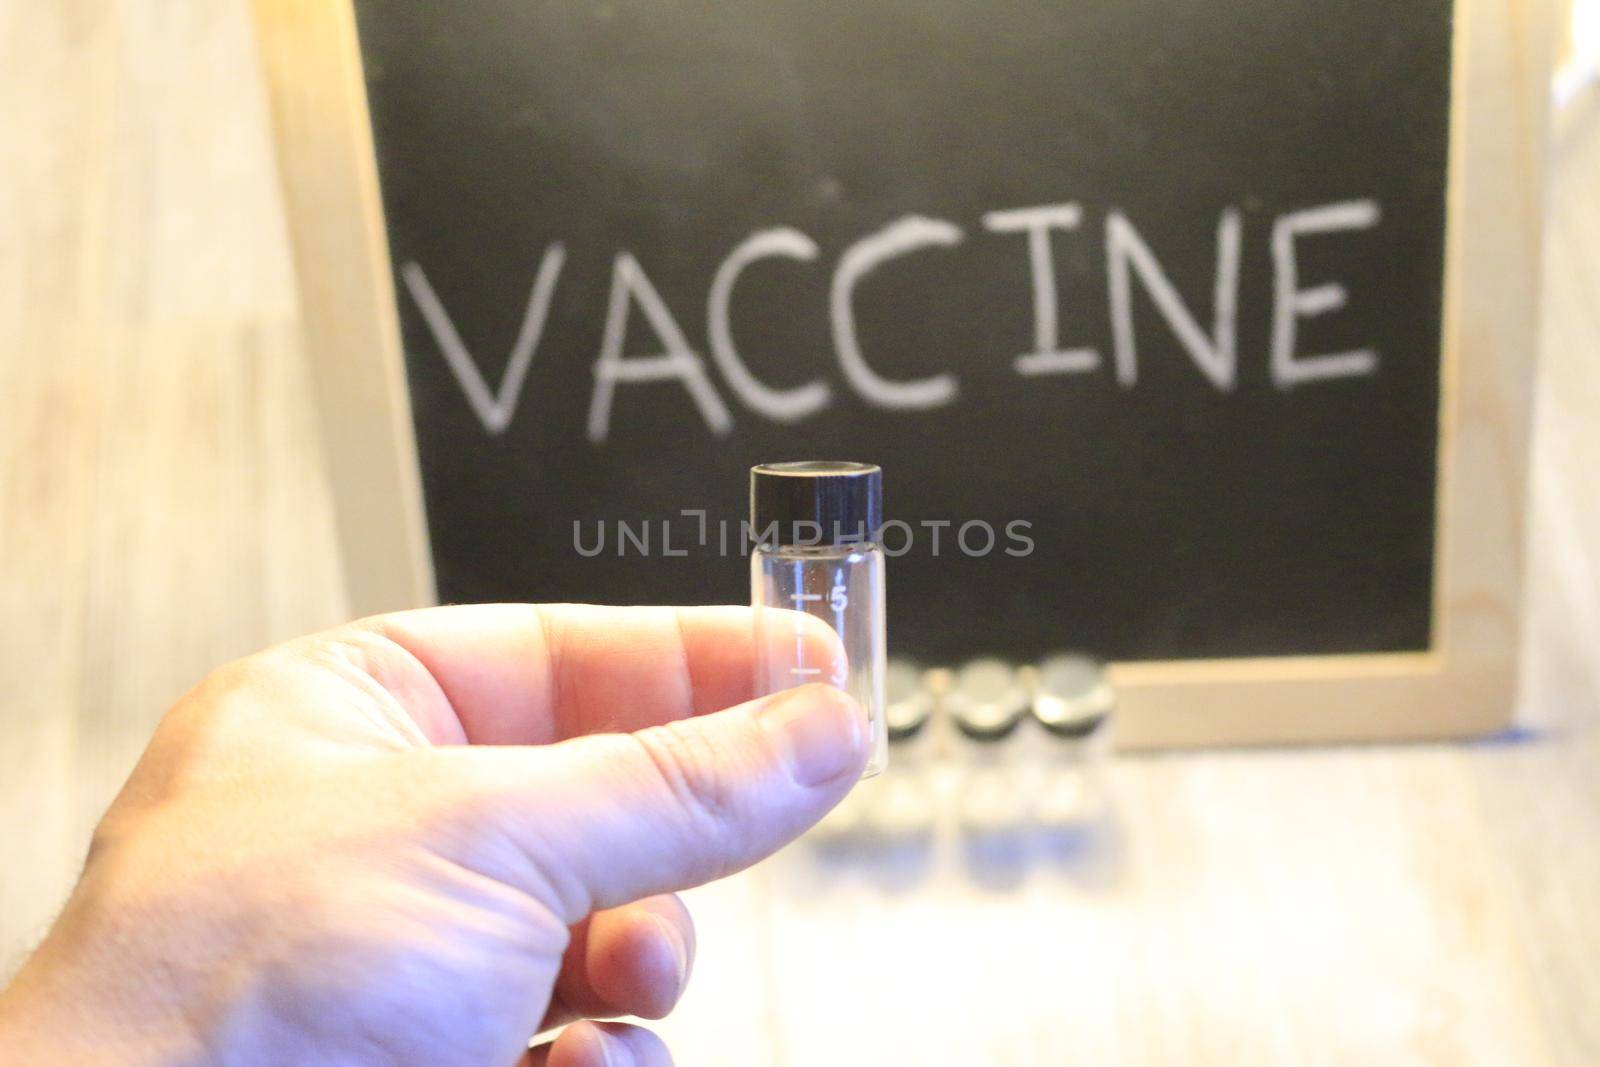 chalkboard with the word vaccine on it. good for any vaccine themed images. High quality photo